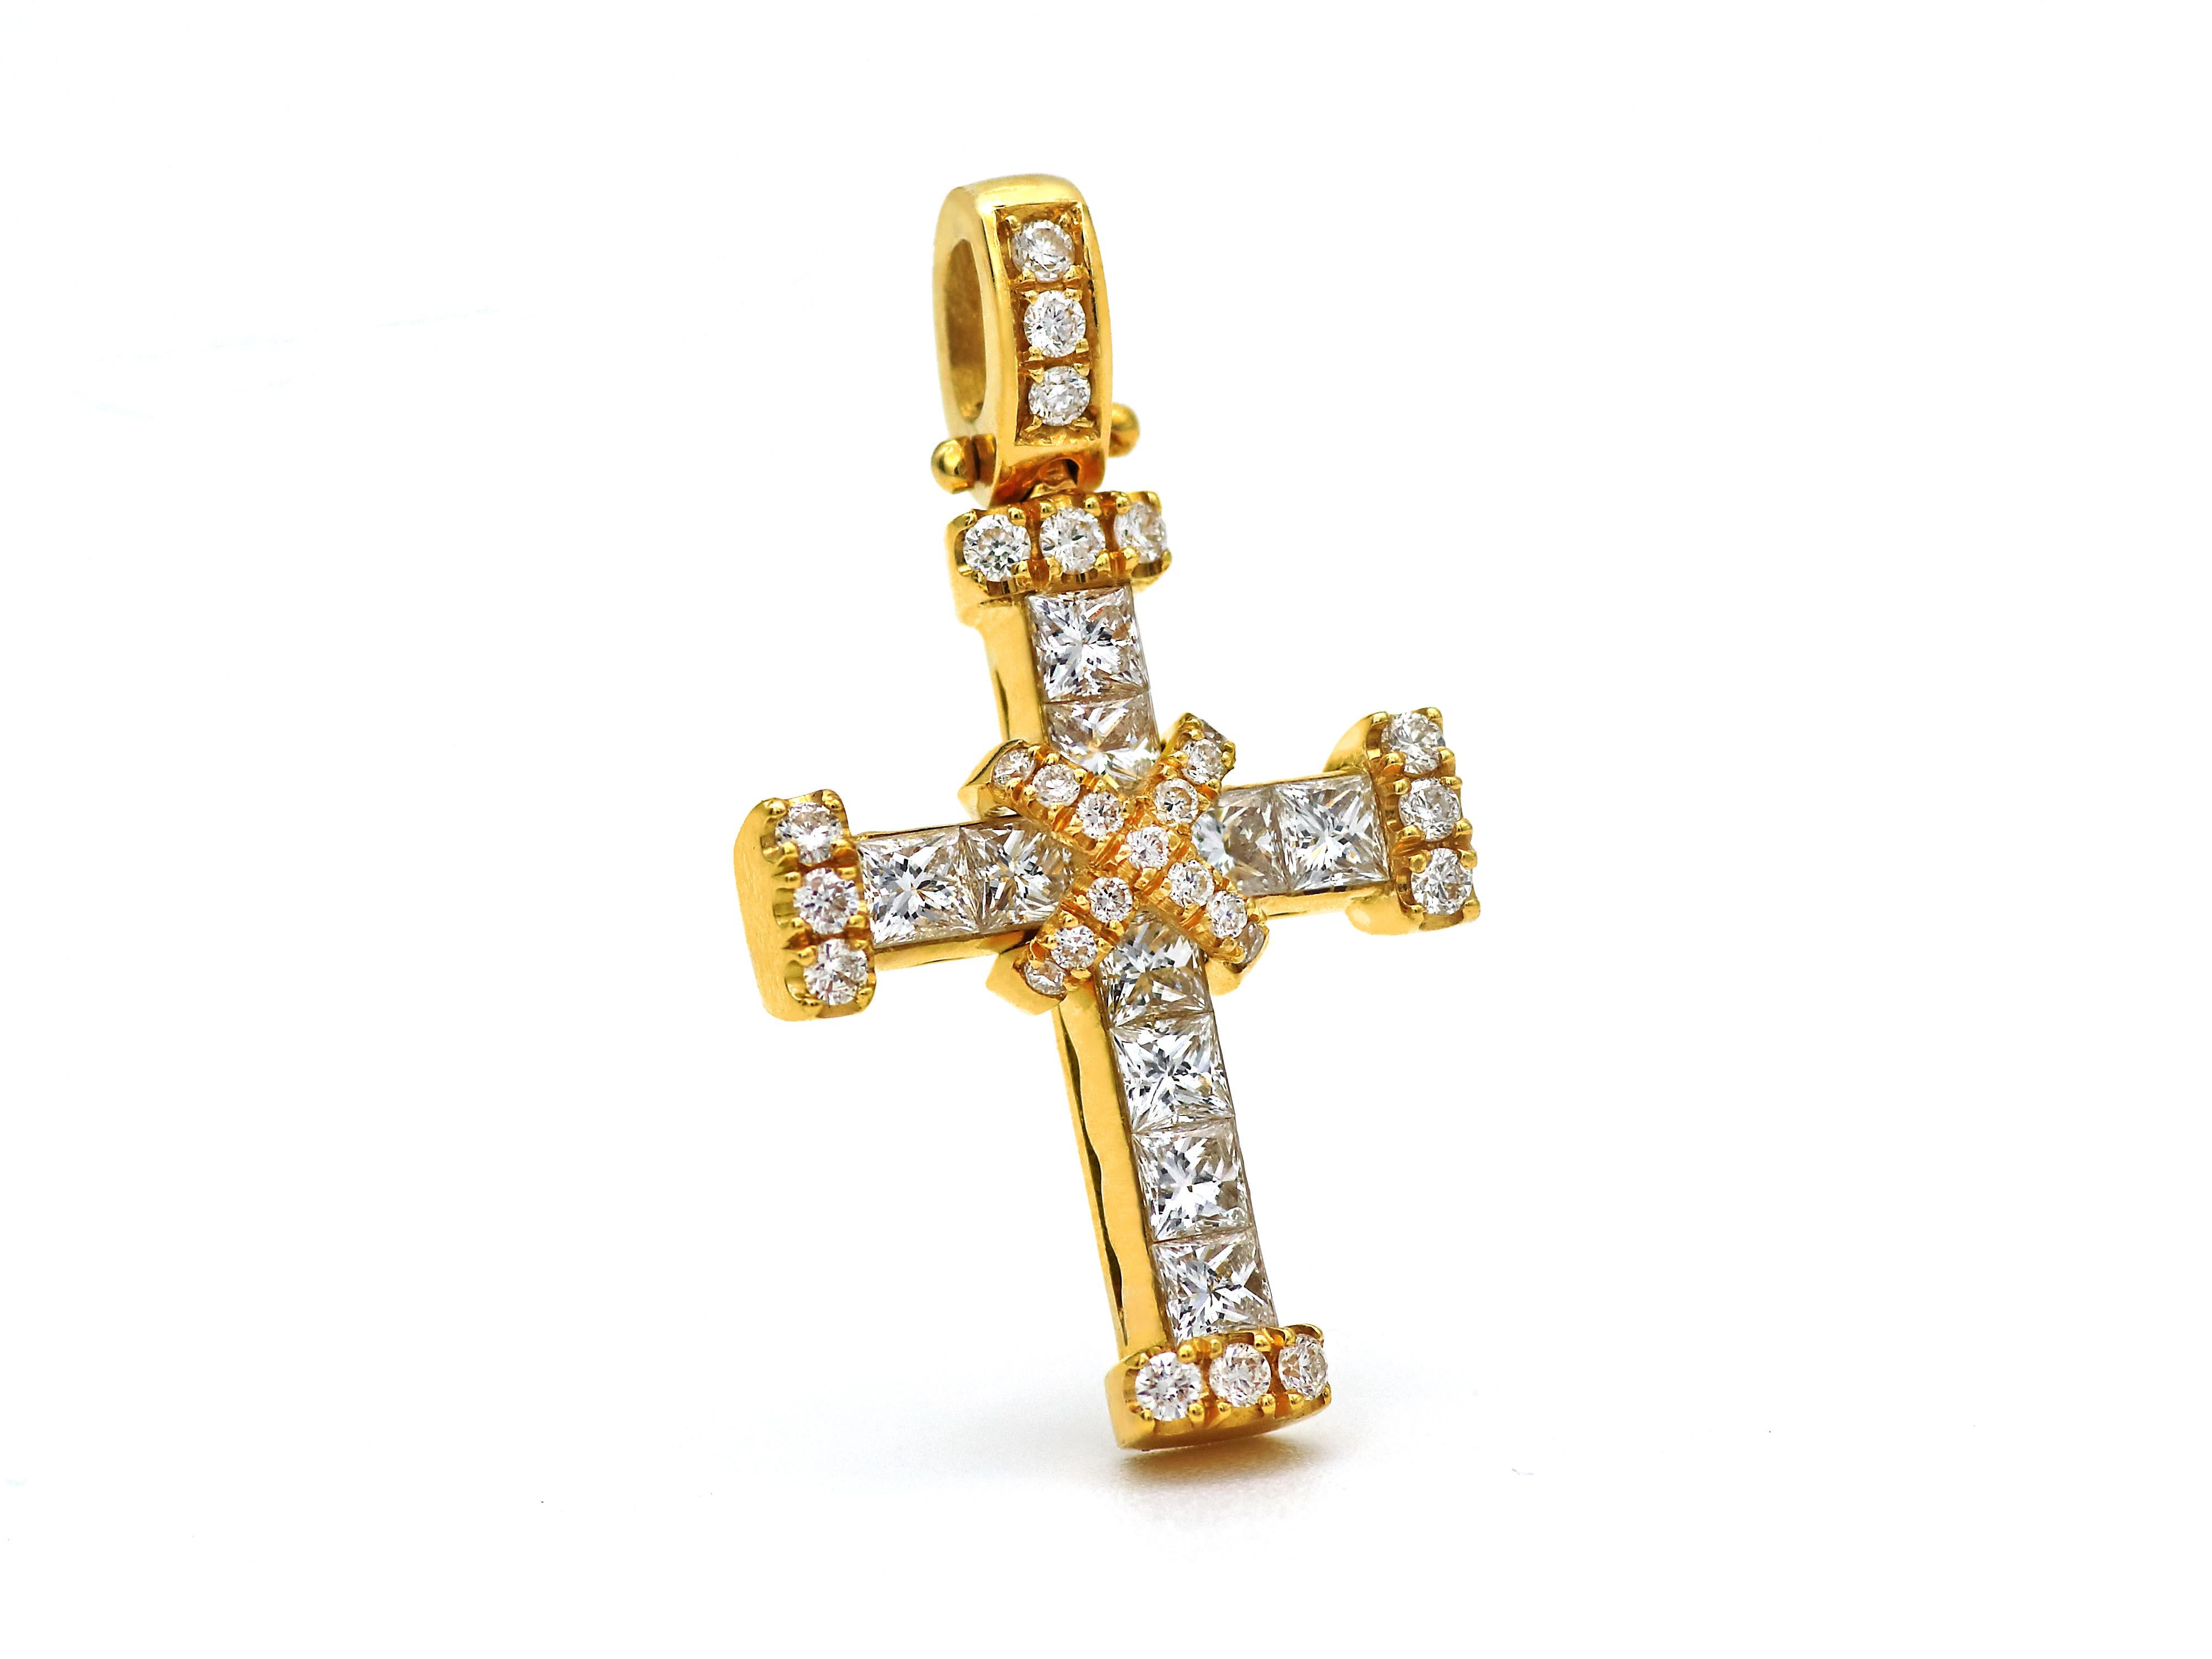 Diamond cross in 18 karat yellow gold in a nice solid and heavy construction with invisible sets of 1.50 carats princess cut diamonds and brilliant cut diamonds on each side and center.
Invisible setting is one of the most difficult ways to set